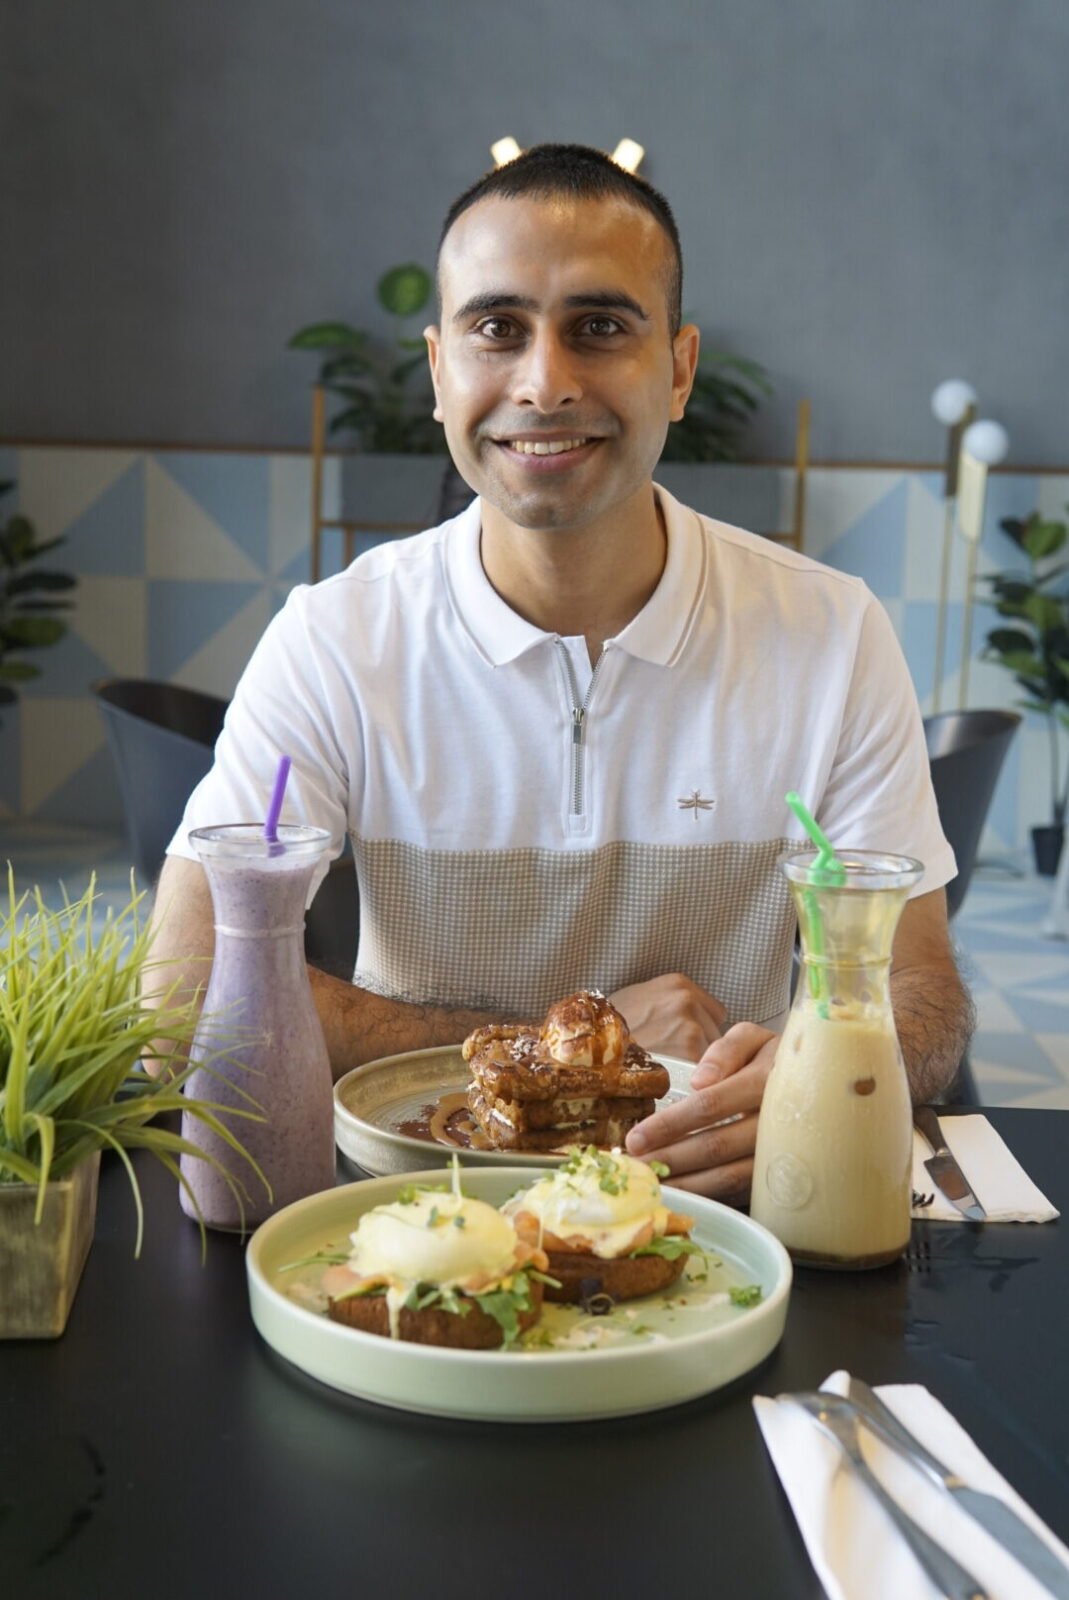 Adil Musa dining at Hampstead Bakery & Cafe